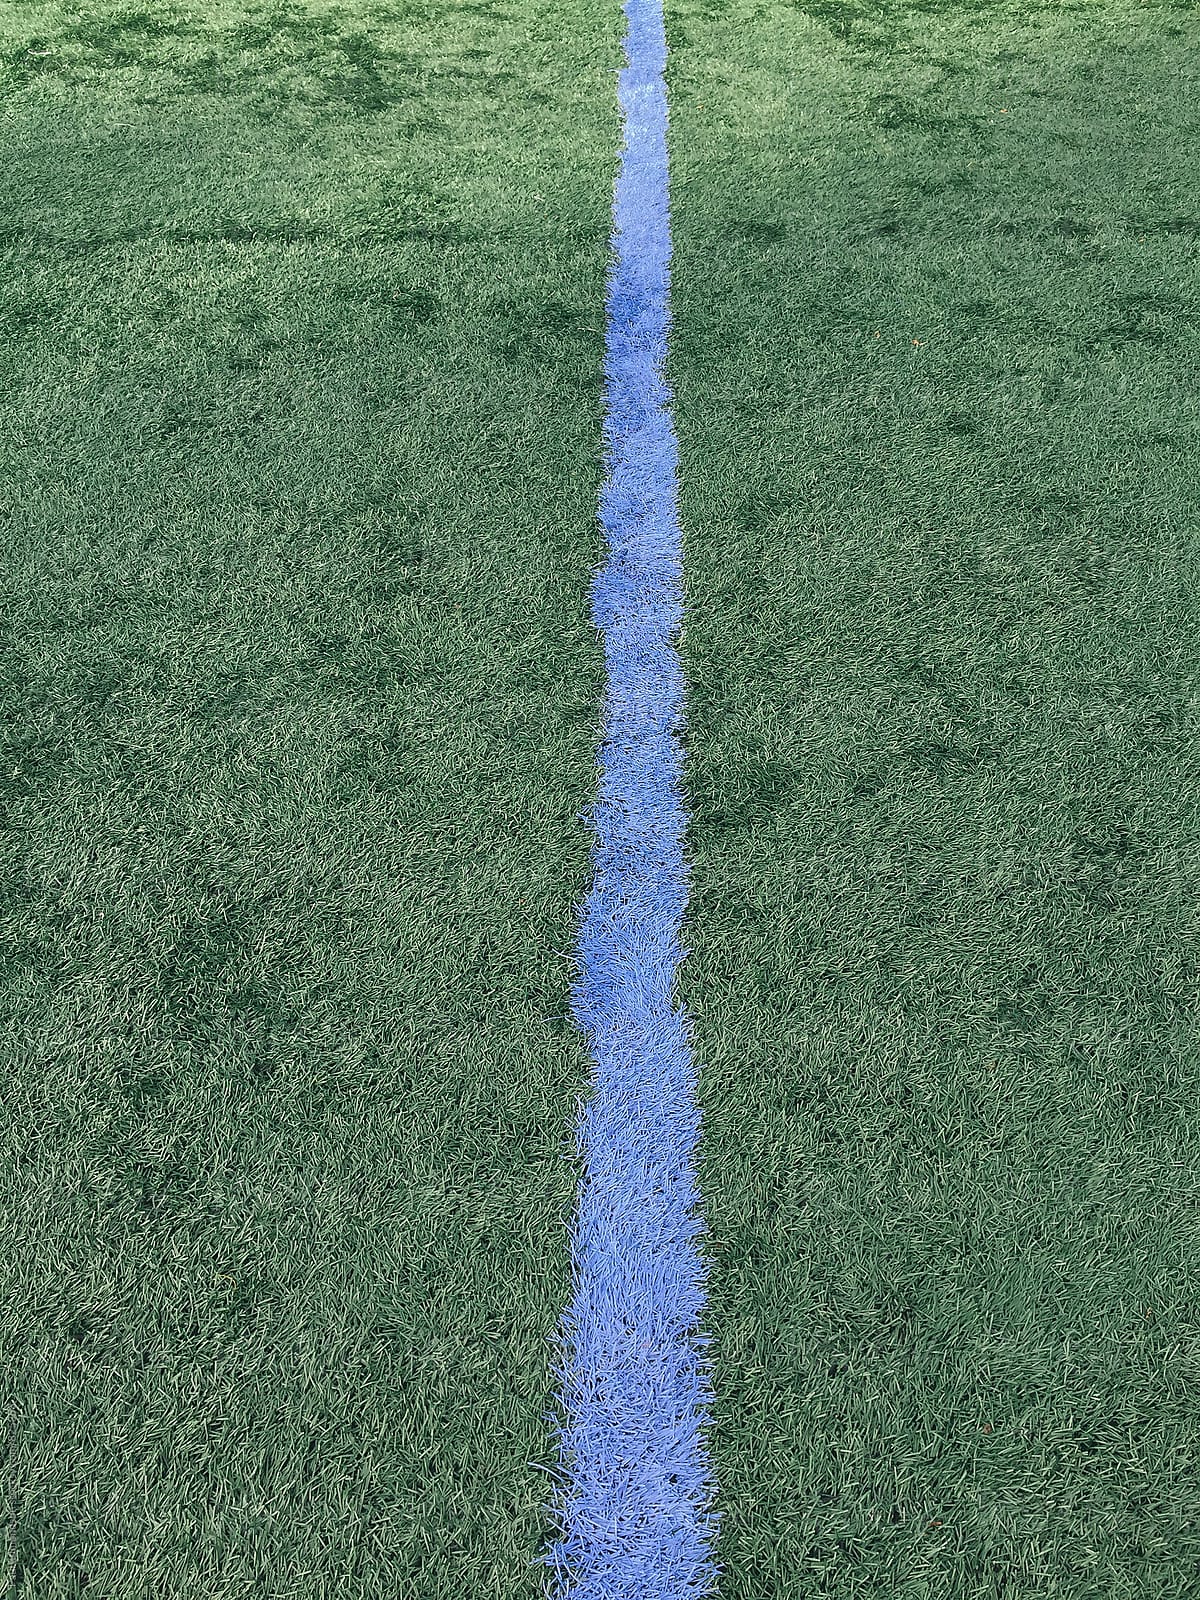 Blue boundary line on artificial turf sports field